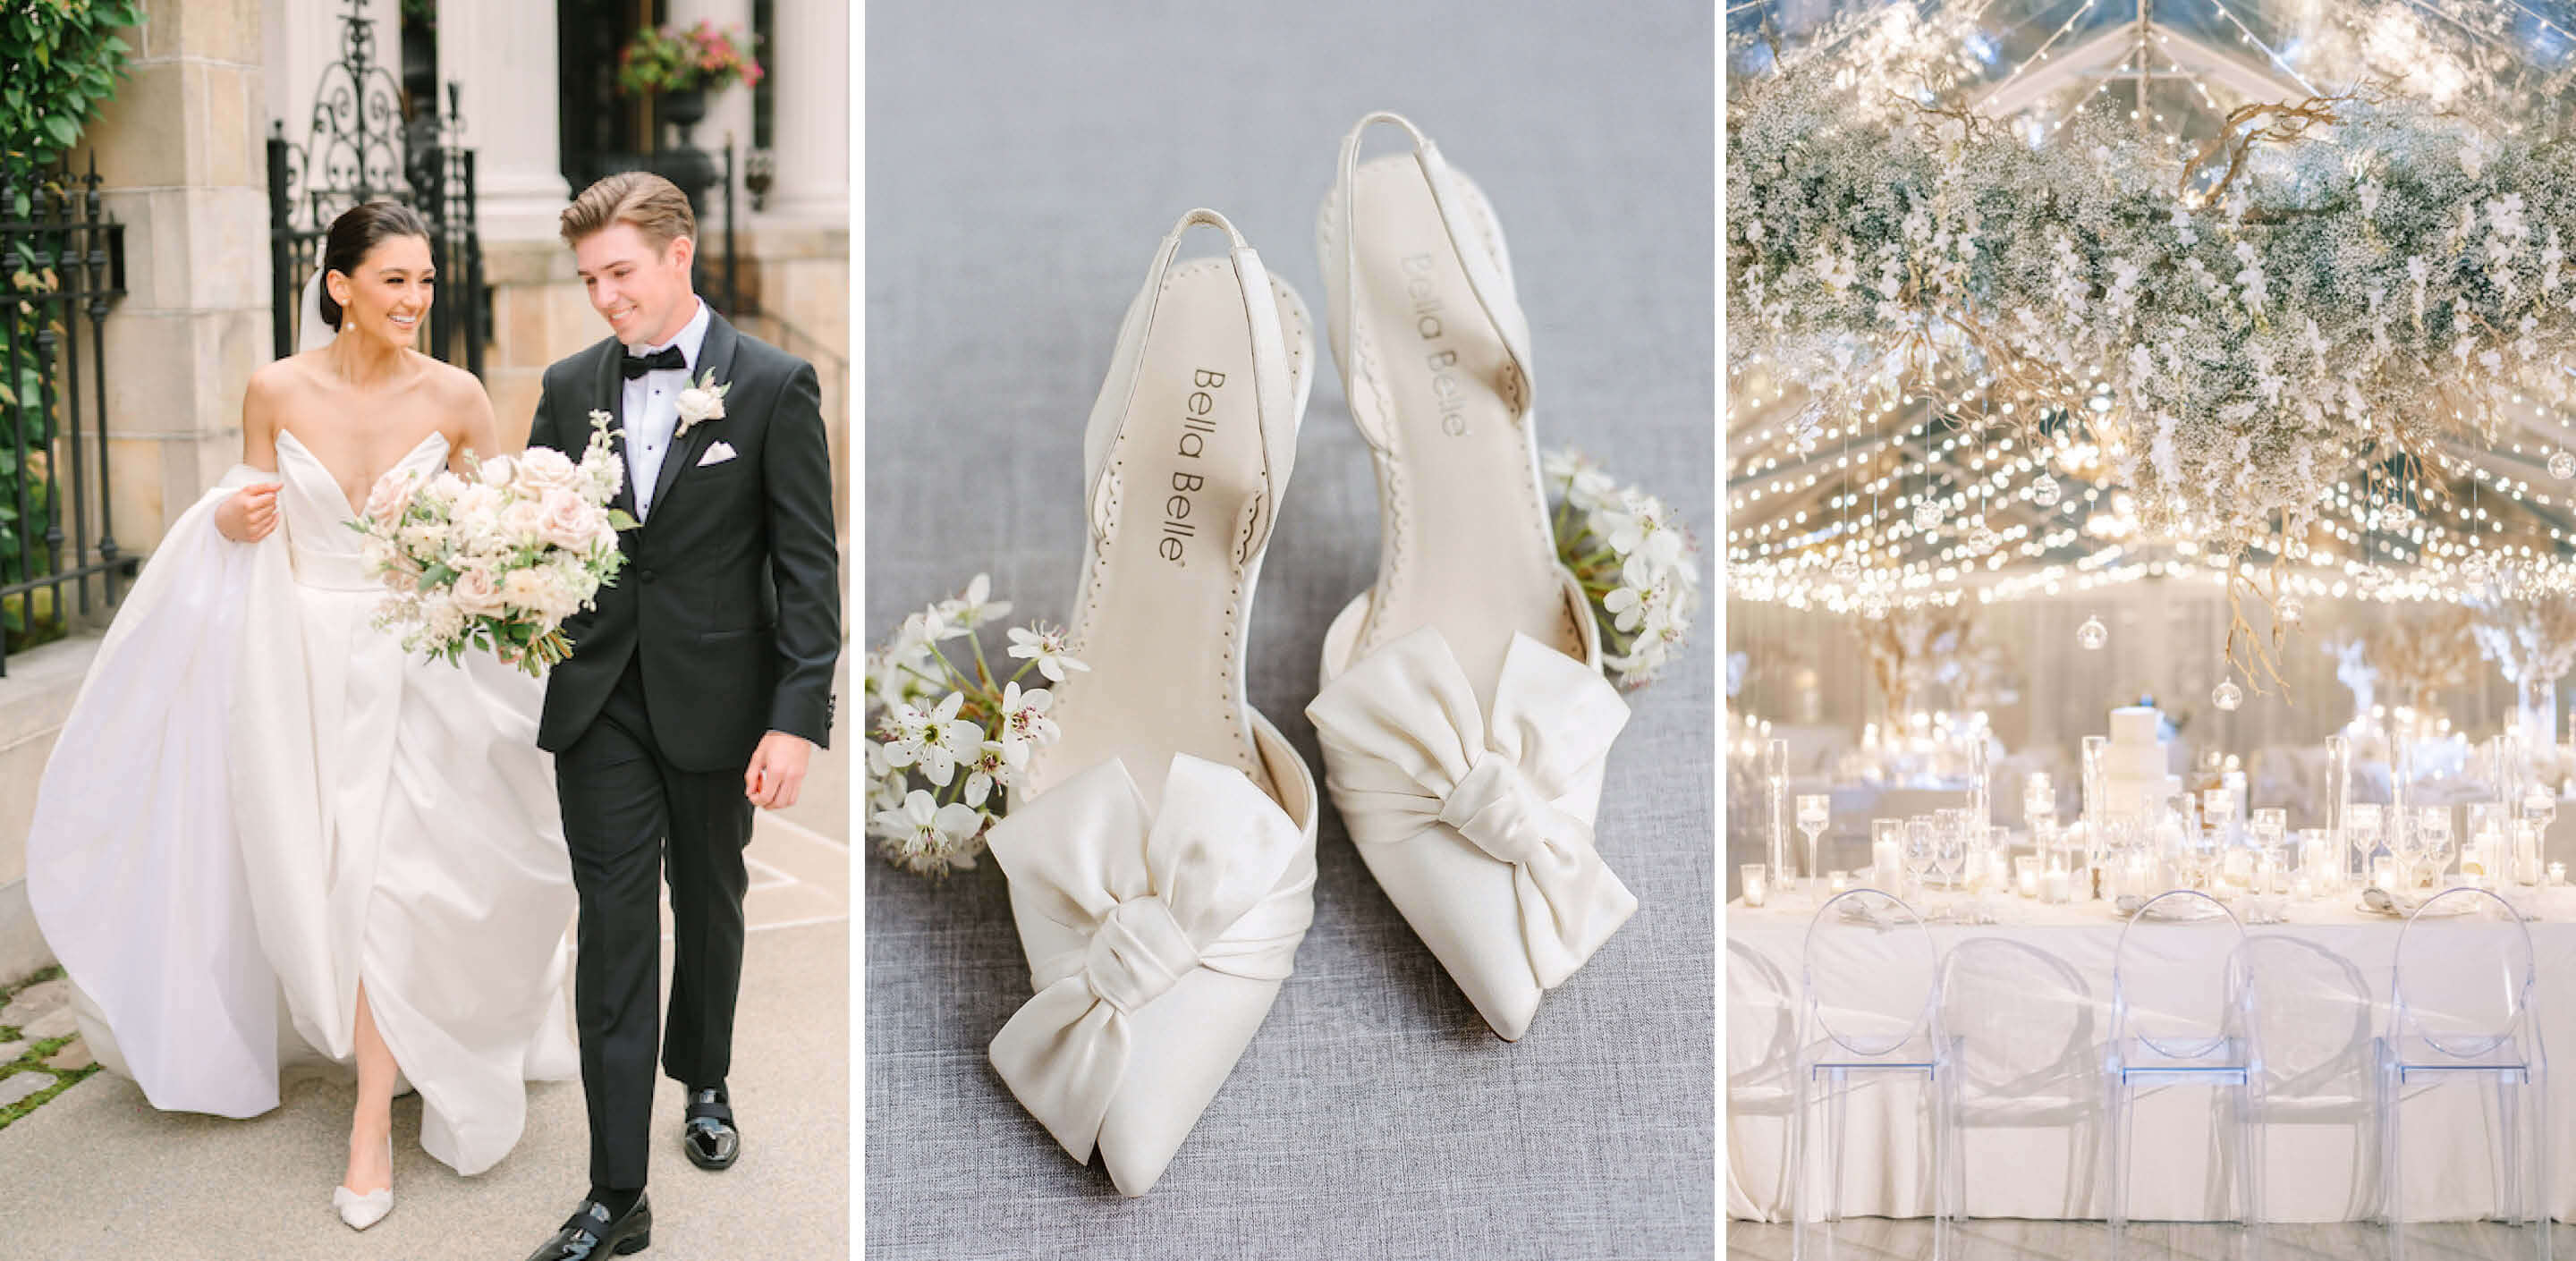 The Best Wedding Shoes for Summer Brides